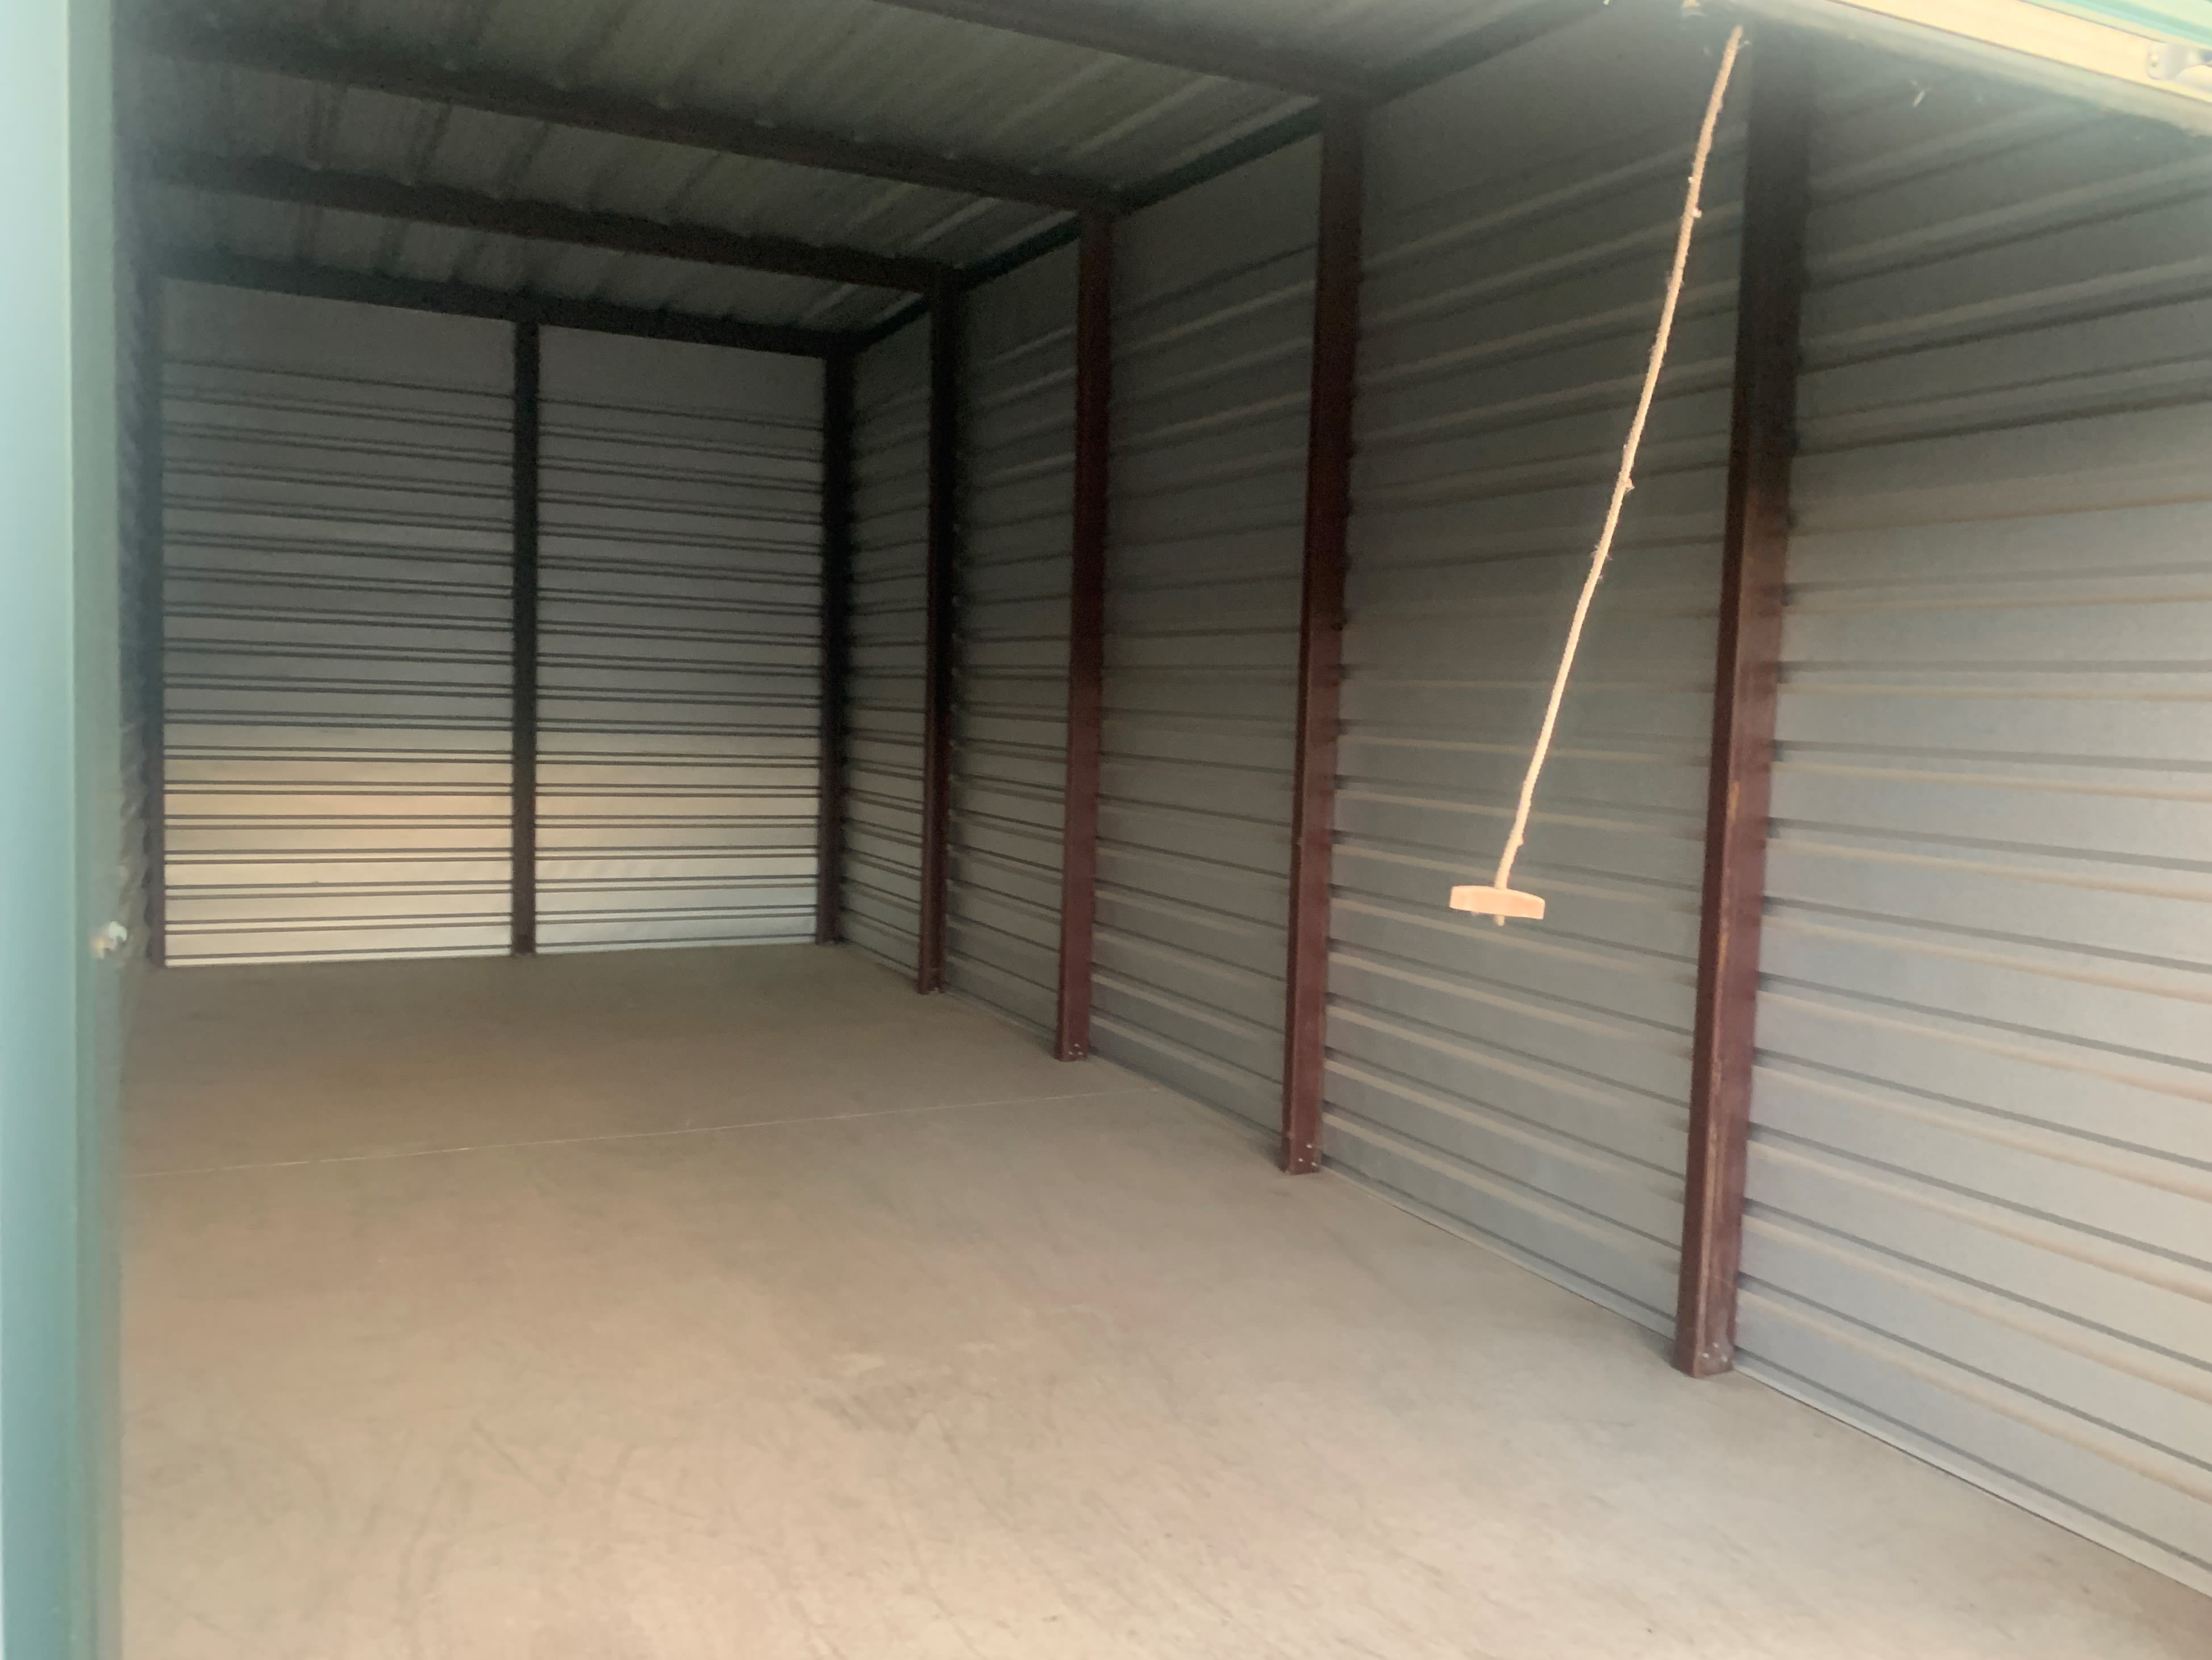 View our list of features at KO Storage in Minot, North Dakota